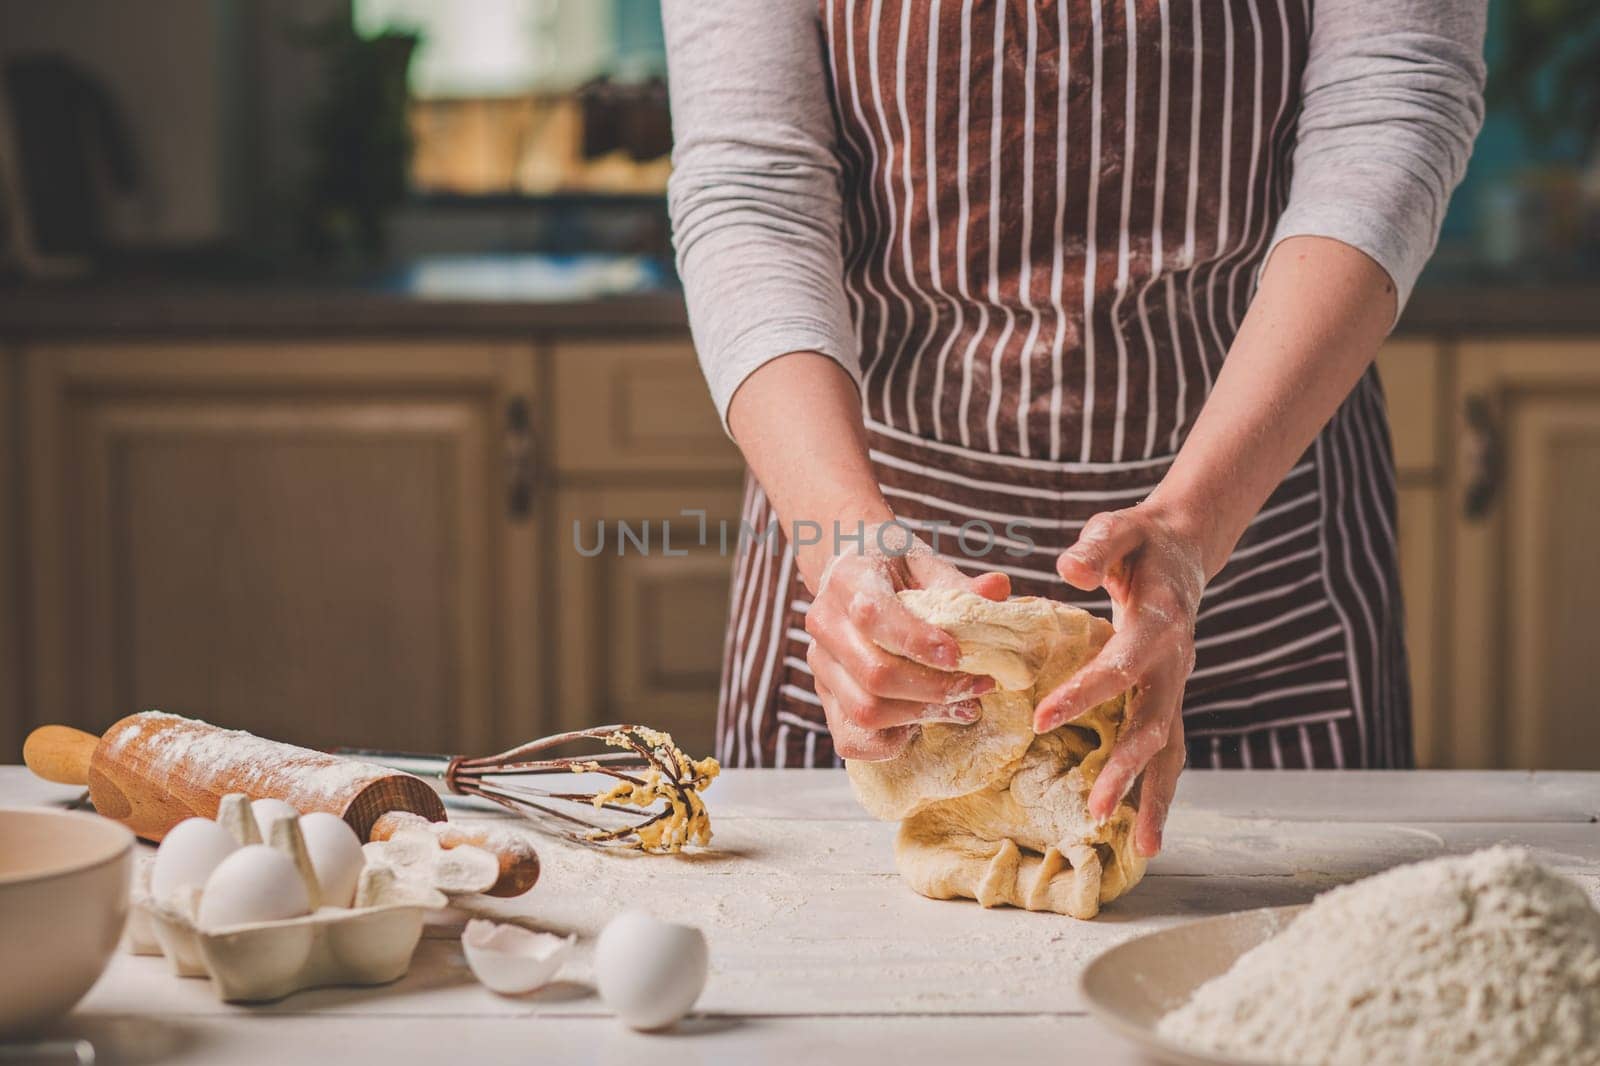 Woman hands kneading dough on kitchen table. A woman in a striped apron is cooking in the kitchen